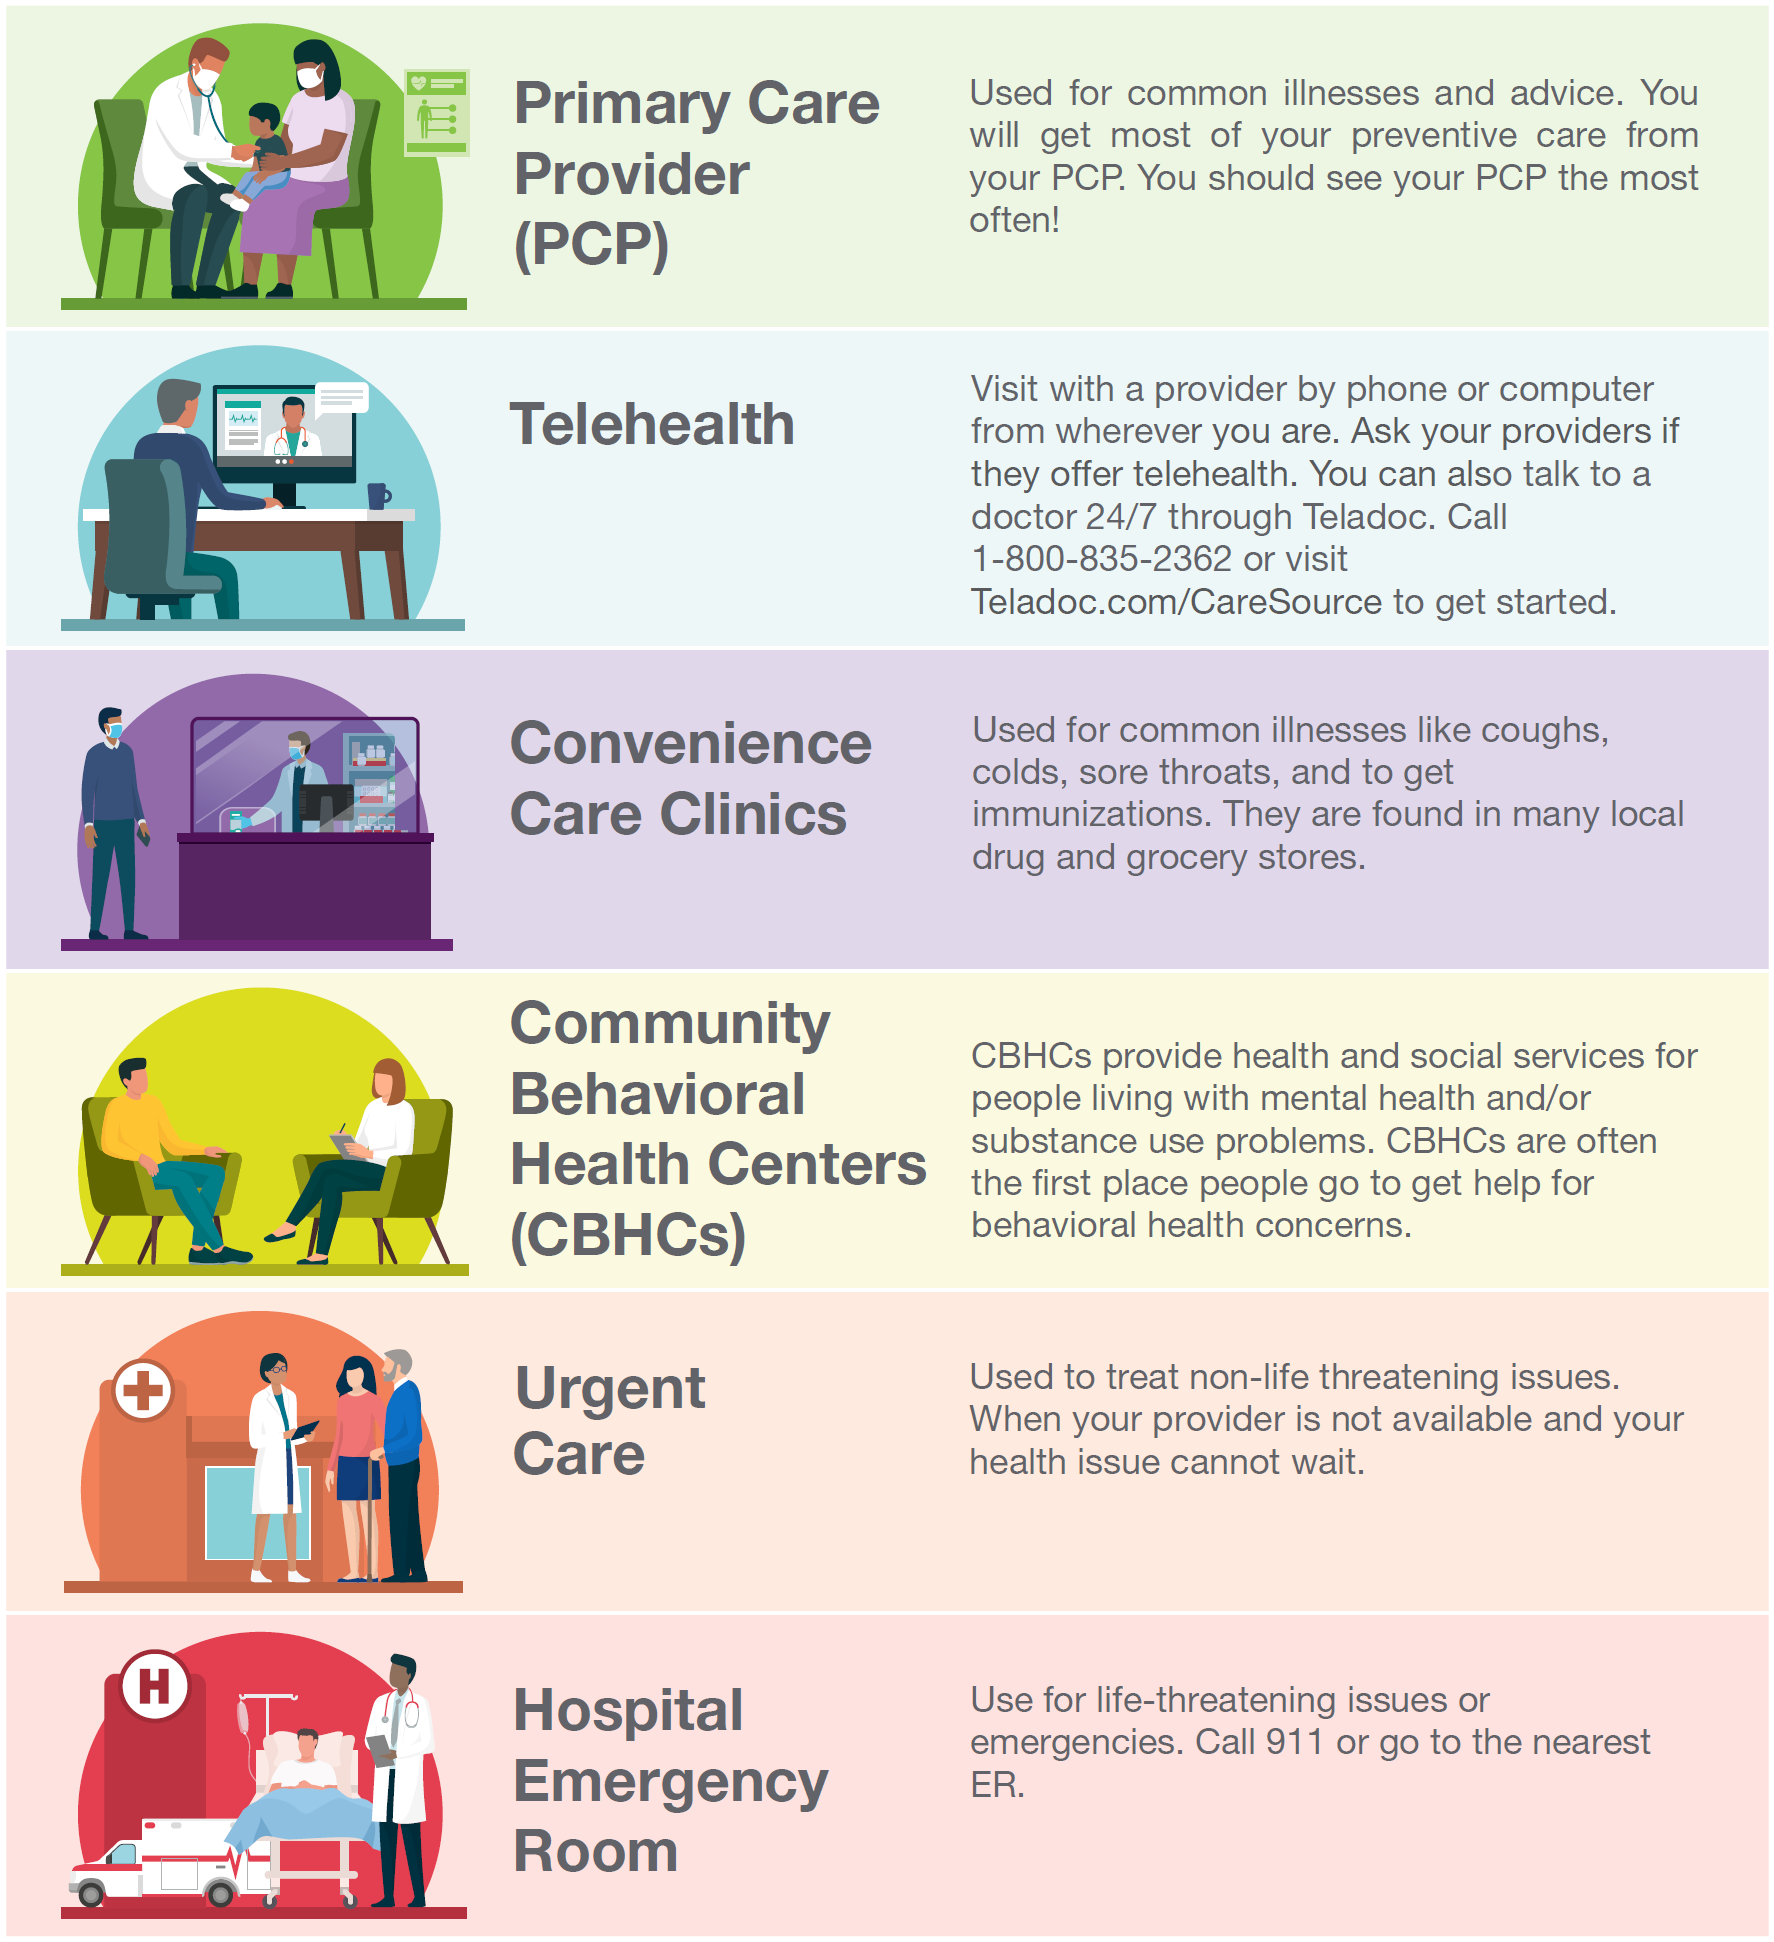 caresource ky 2018 preventive care cost and services pdf